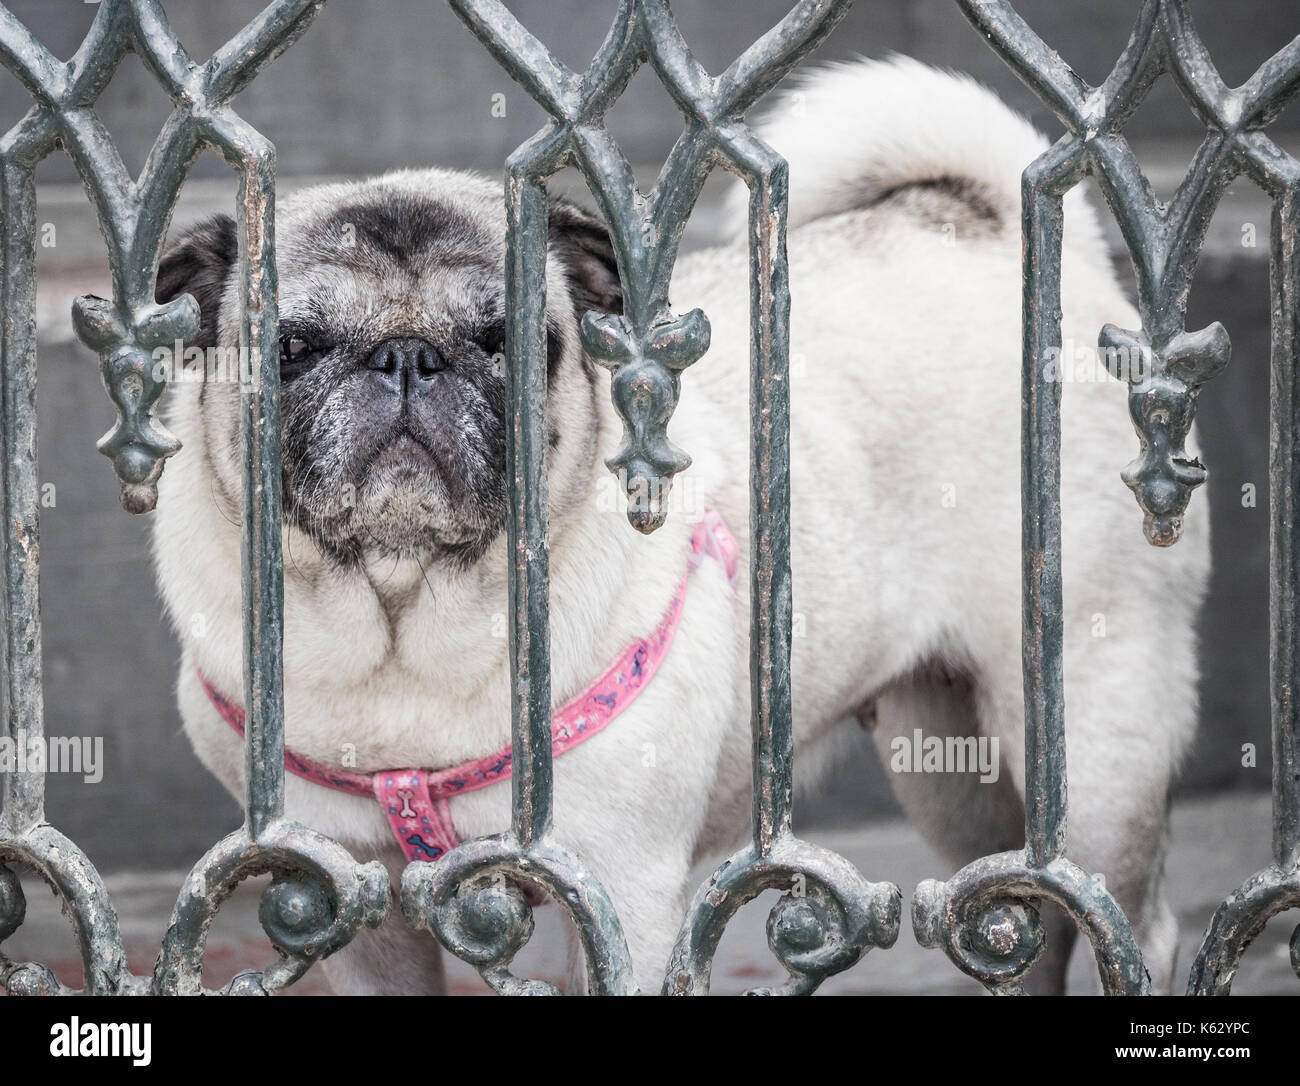 Pug breed of dog looking through steel gate Stock Photo